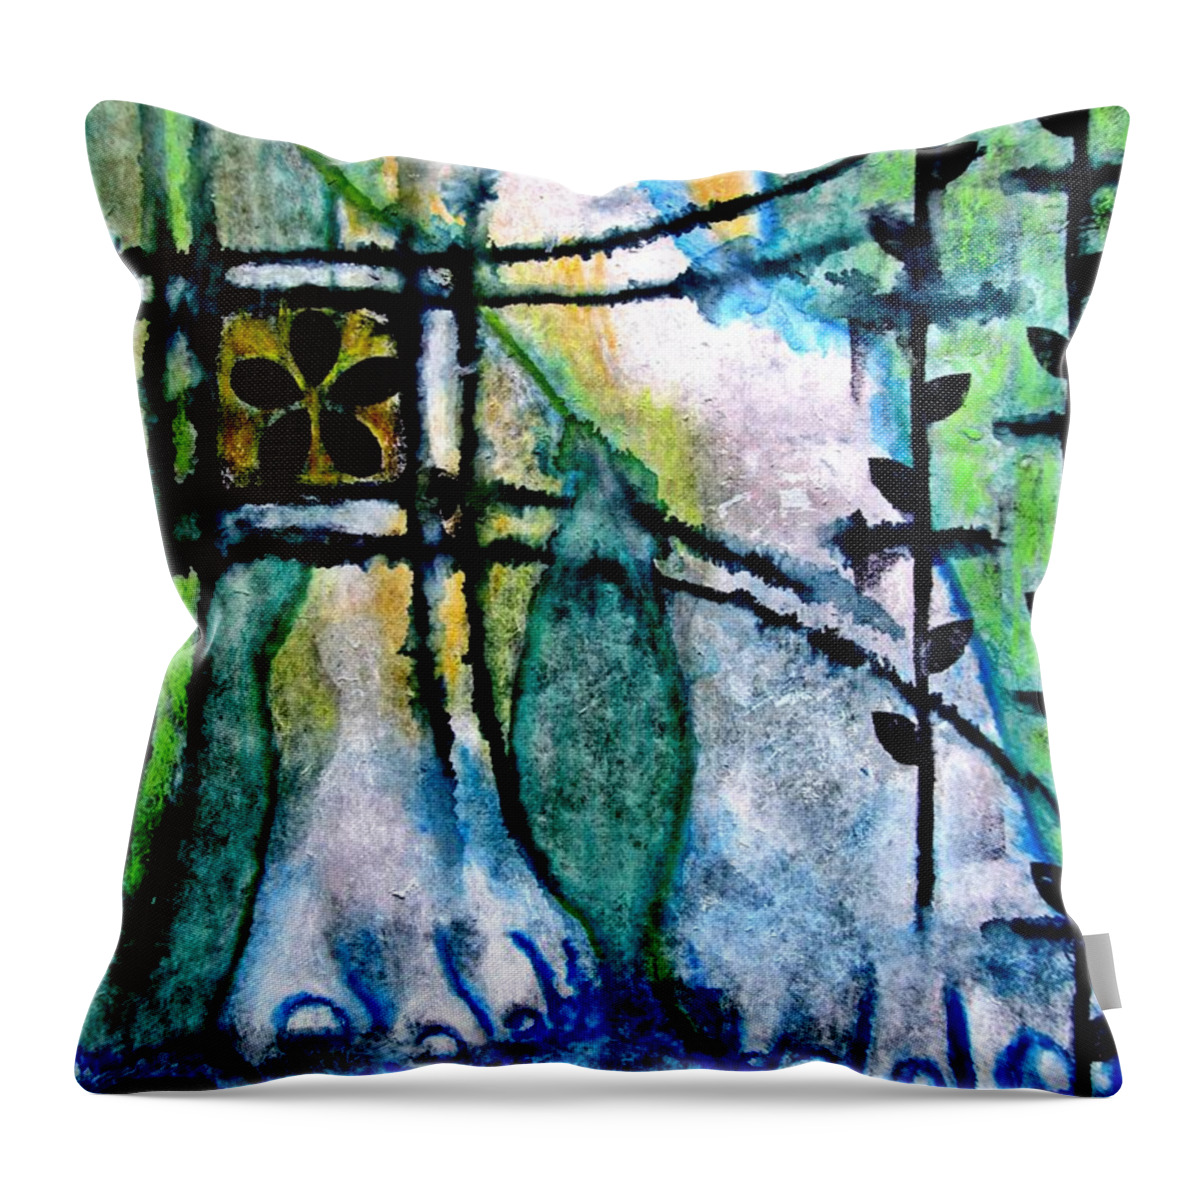 Barefoot Throw Pillow featuring the digital art Barefoot in the Garden by Maria Huntley